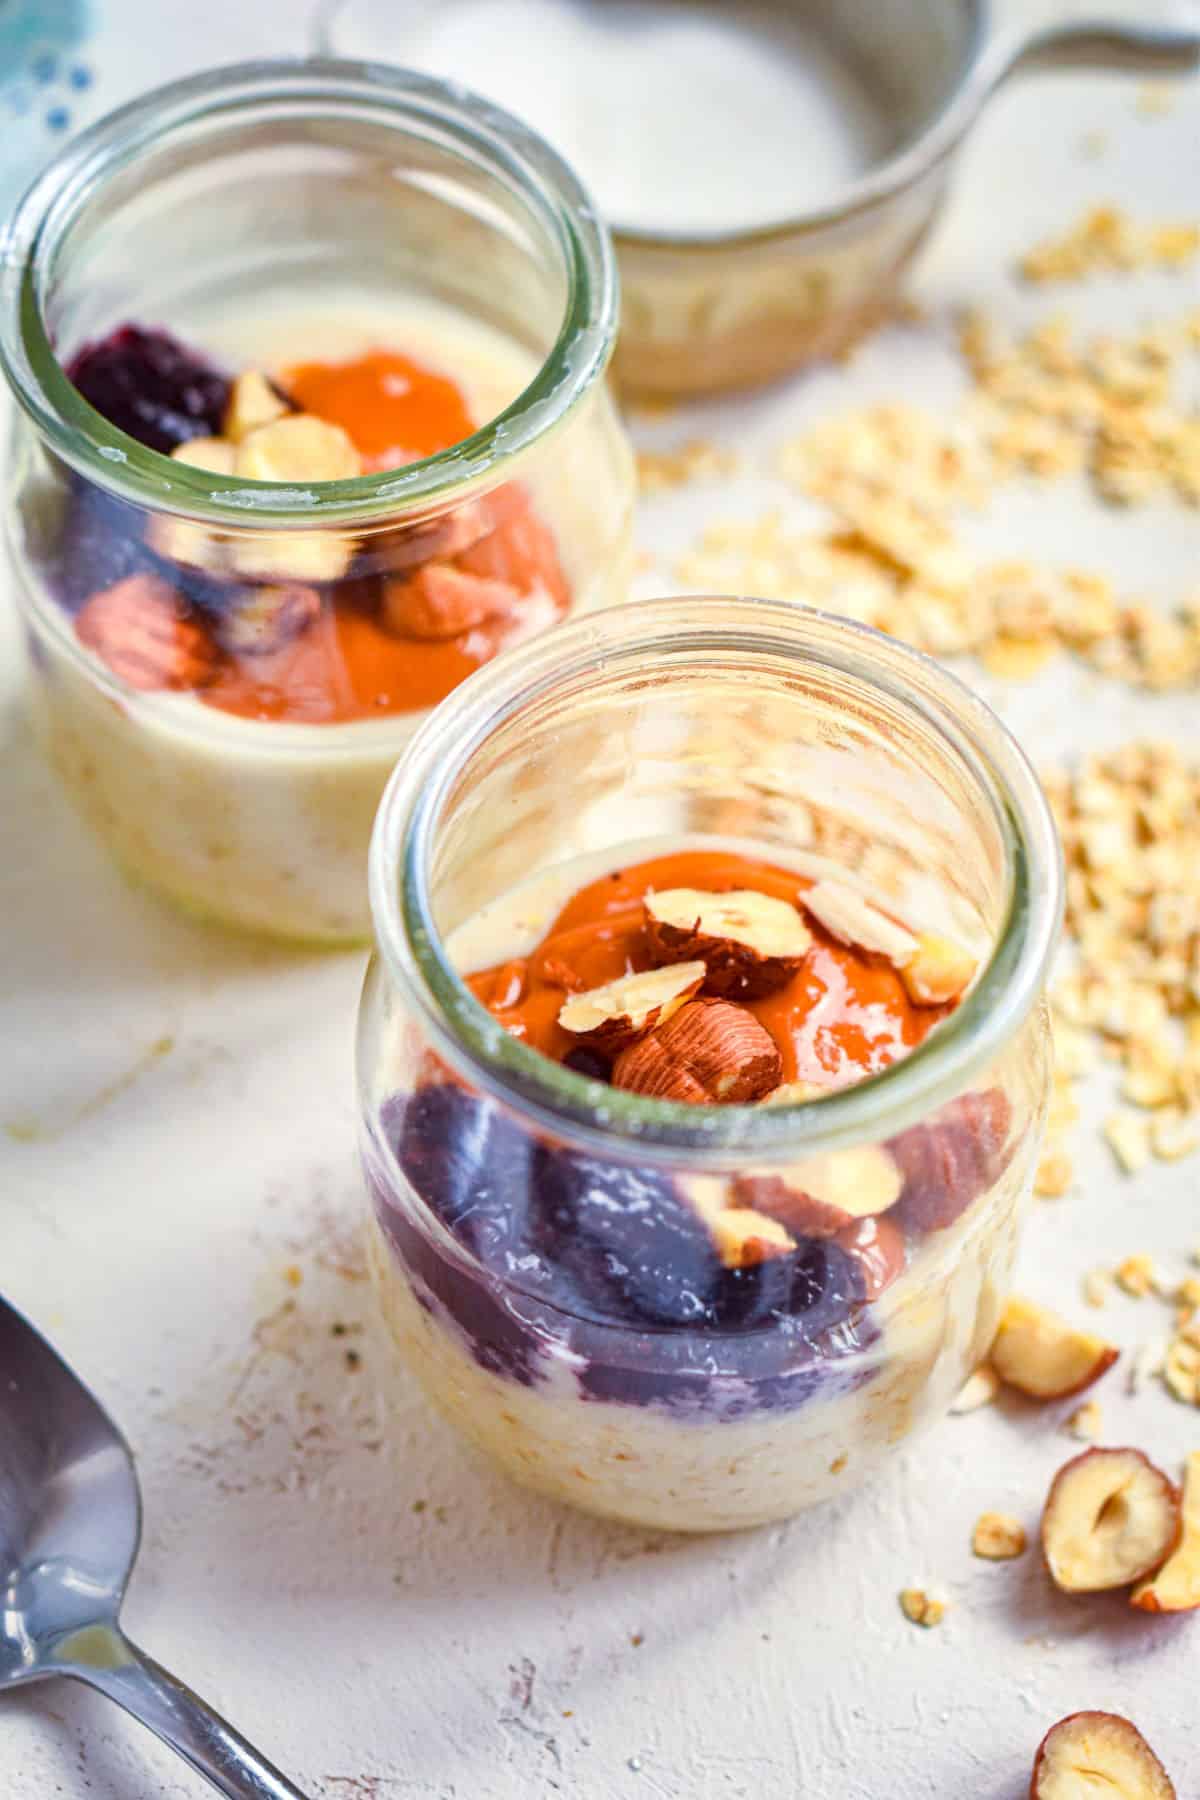 Porridge shots with peanut butter, jelly and hazelnuts.